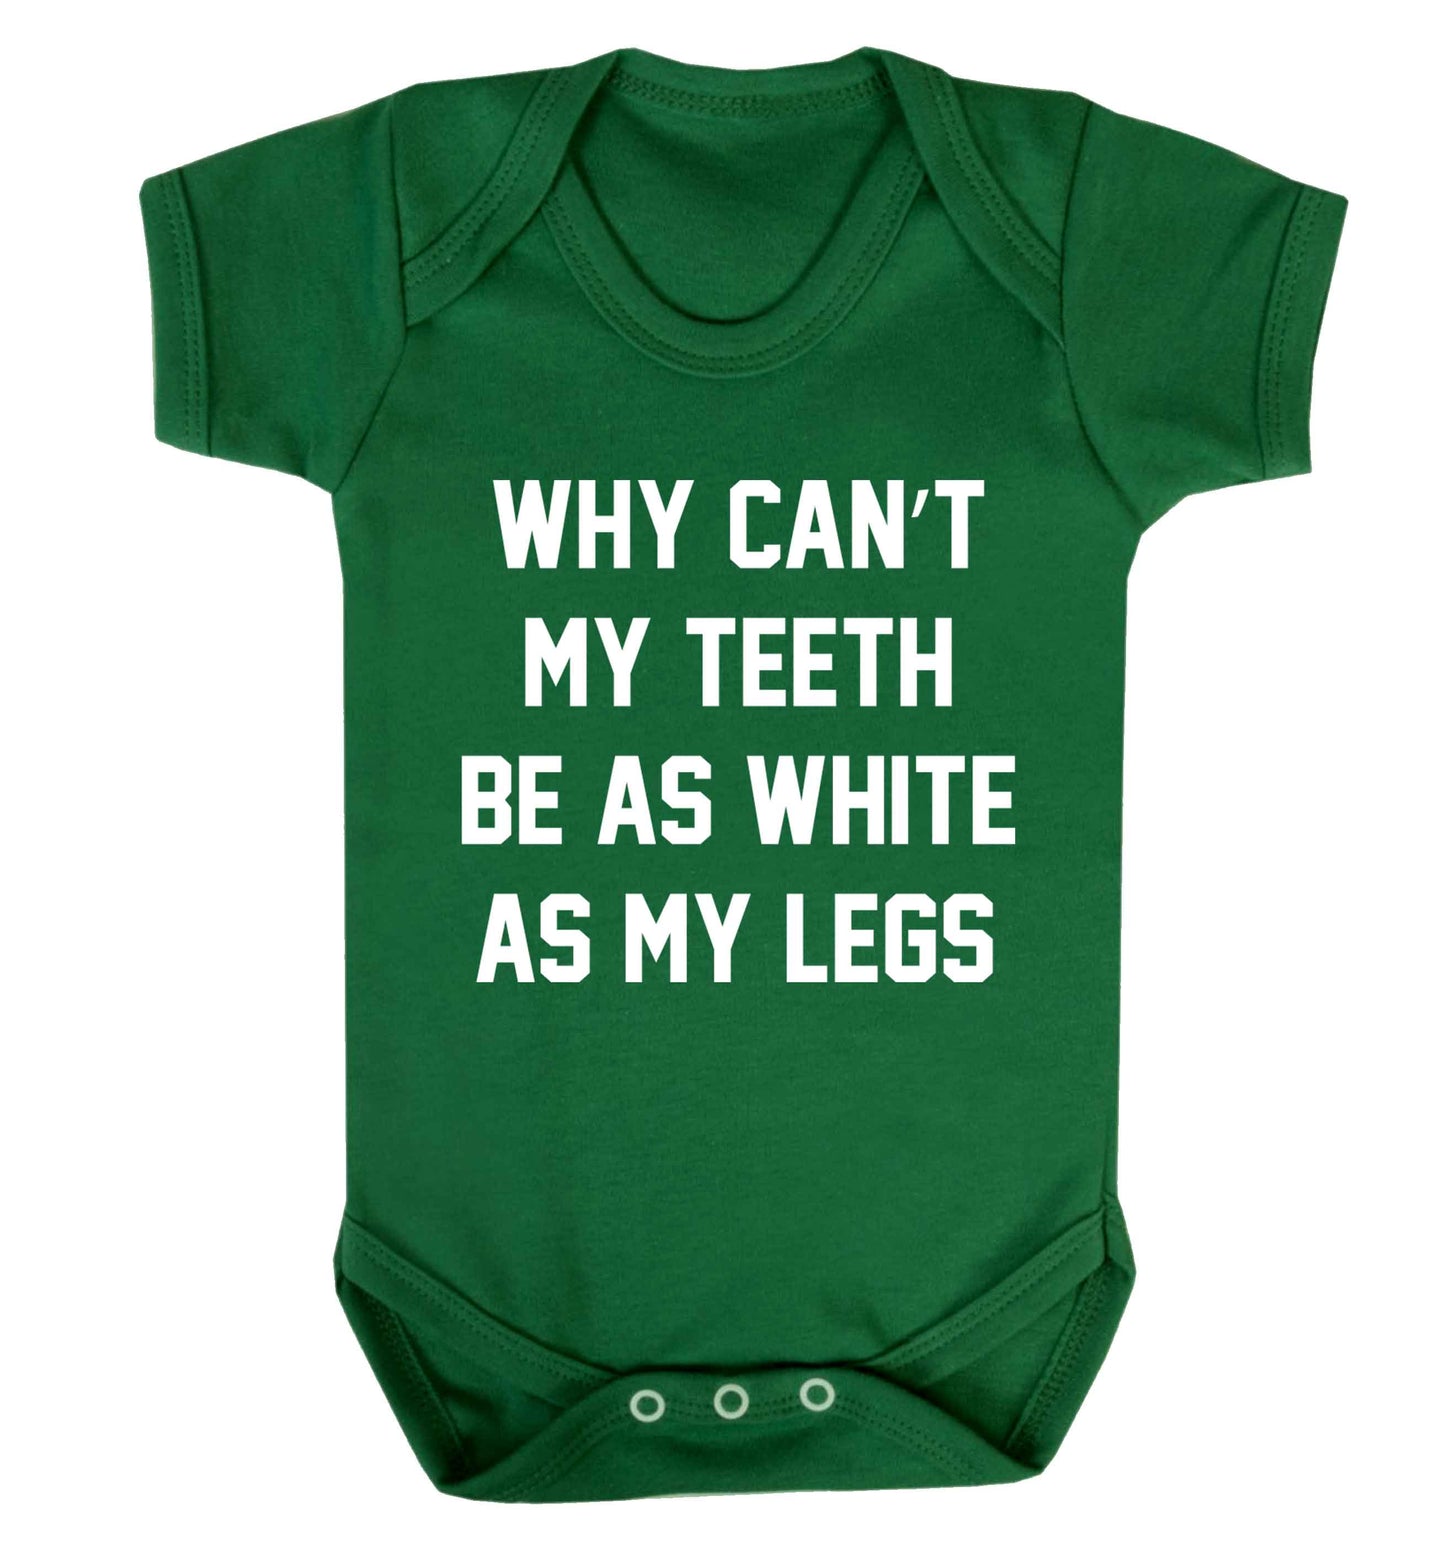 Why can't my teeth be as white as my legs Baby Vest green 18-24 months